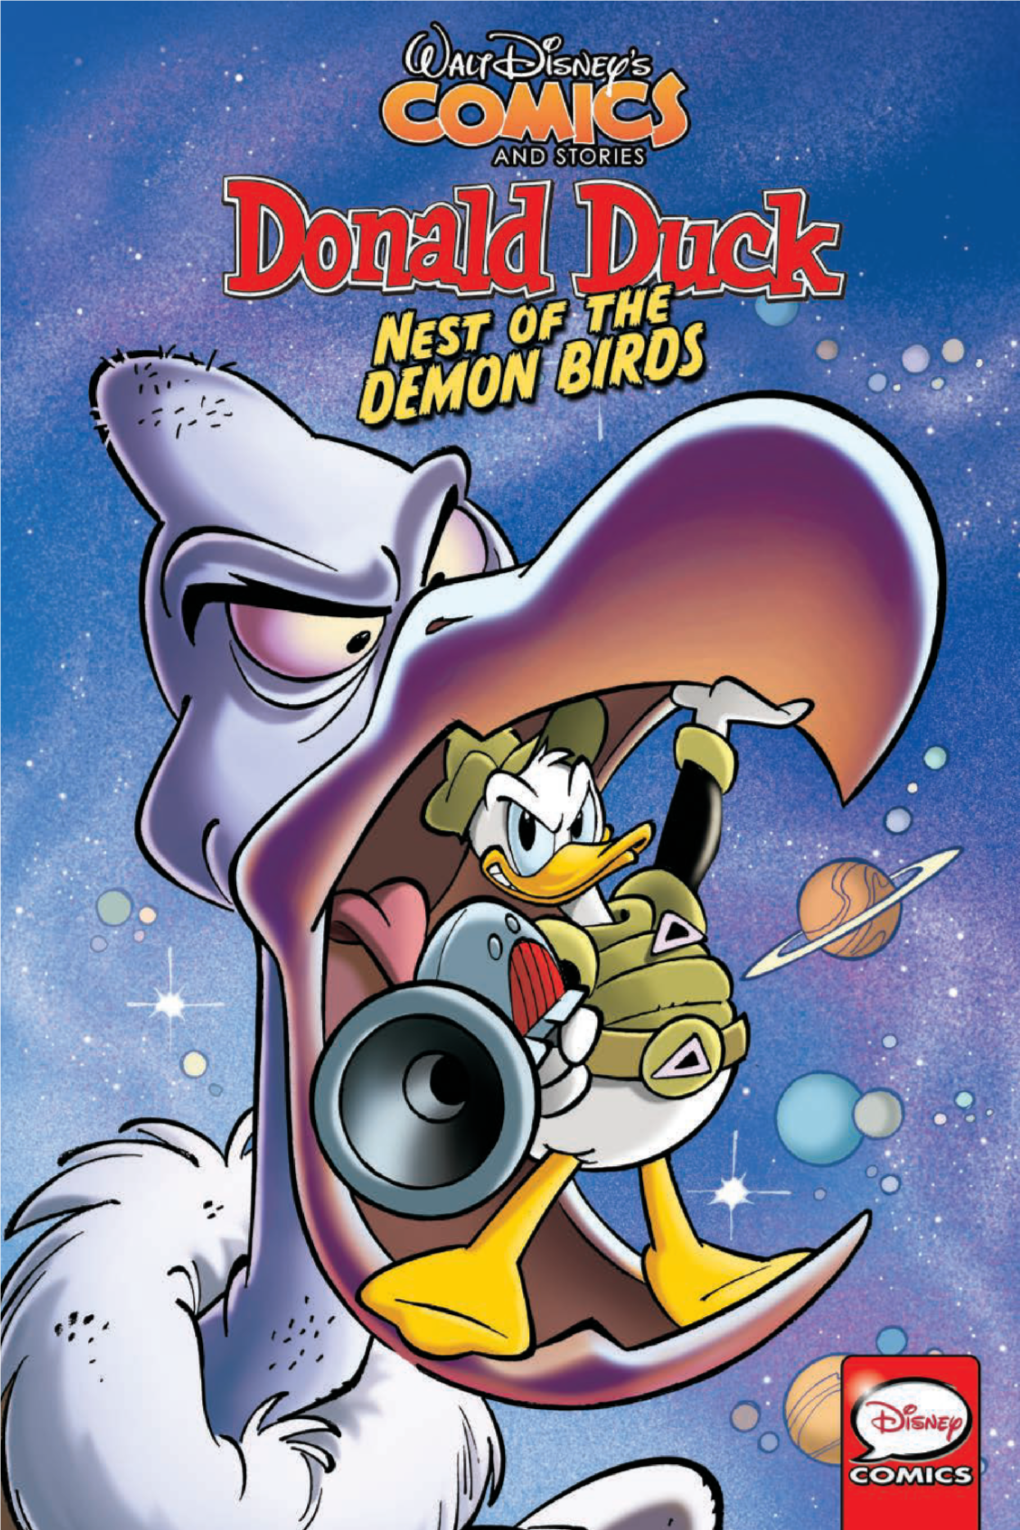 Read the Preview of Donaldduck: Nest of The